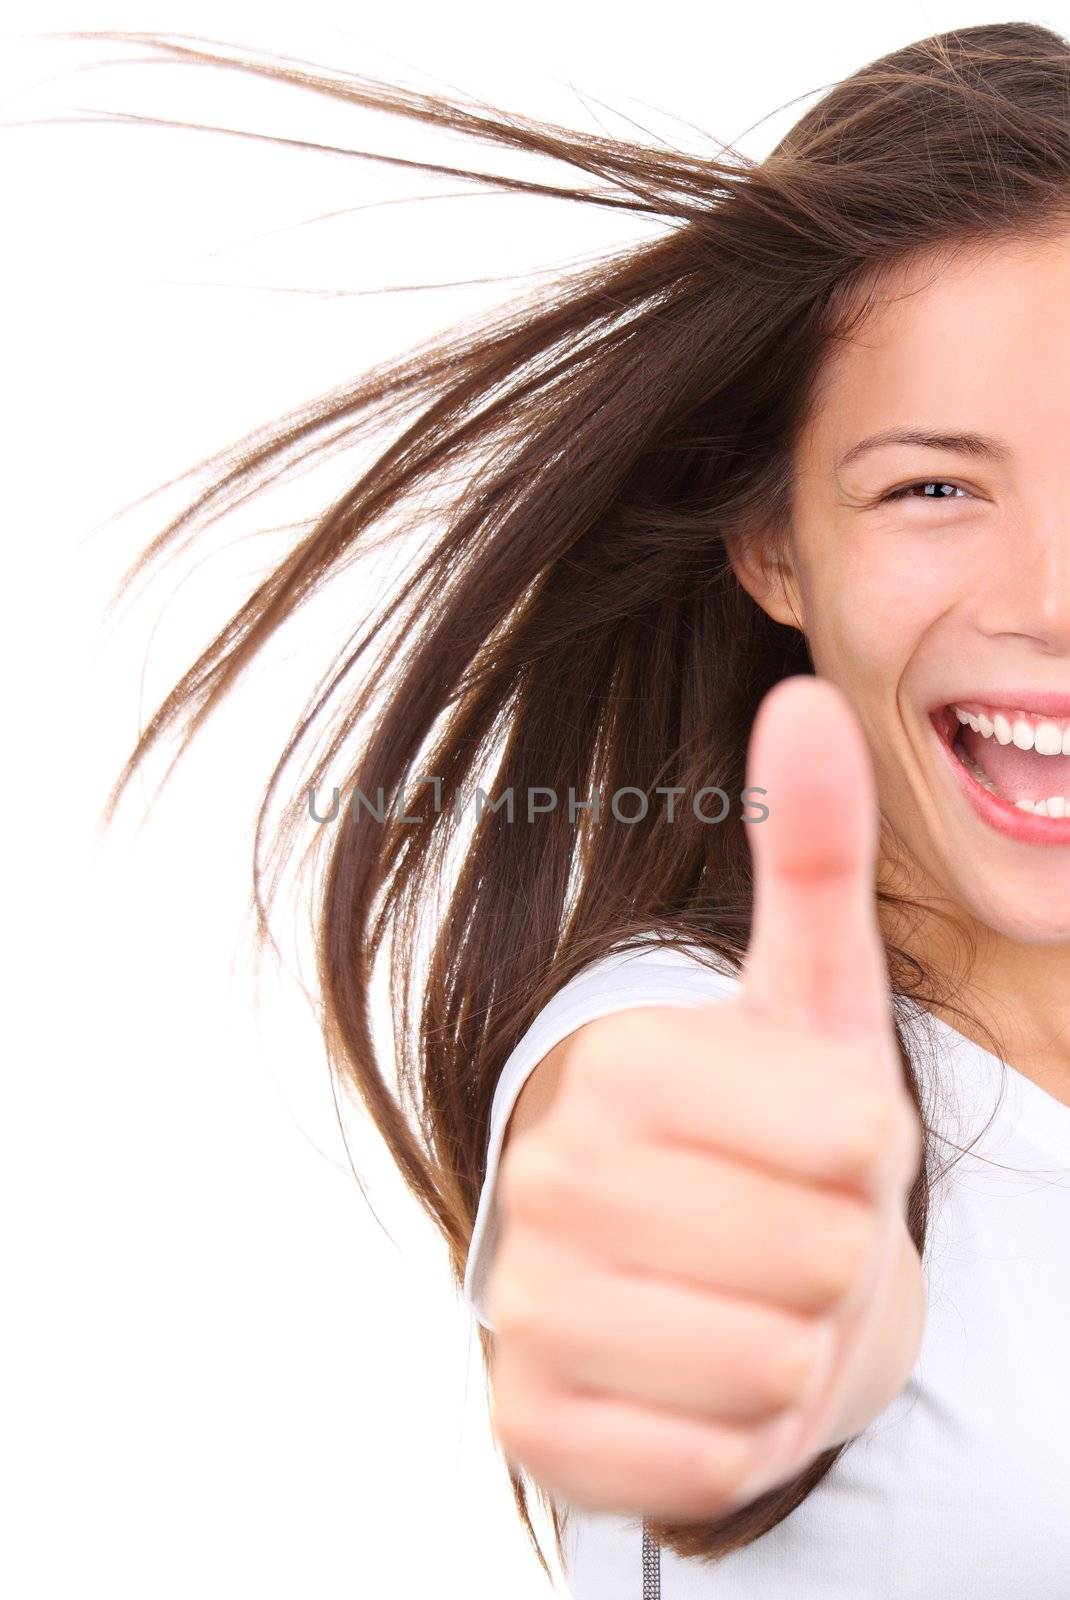 Happy woman with fresh look giving a thumbs up. Isolated on white background. Mixed race chinese / caucasian model.